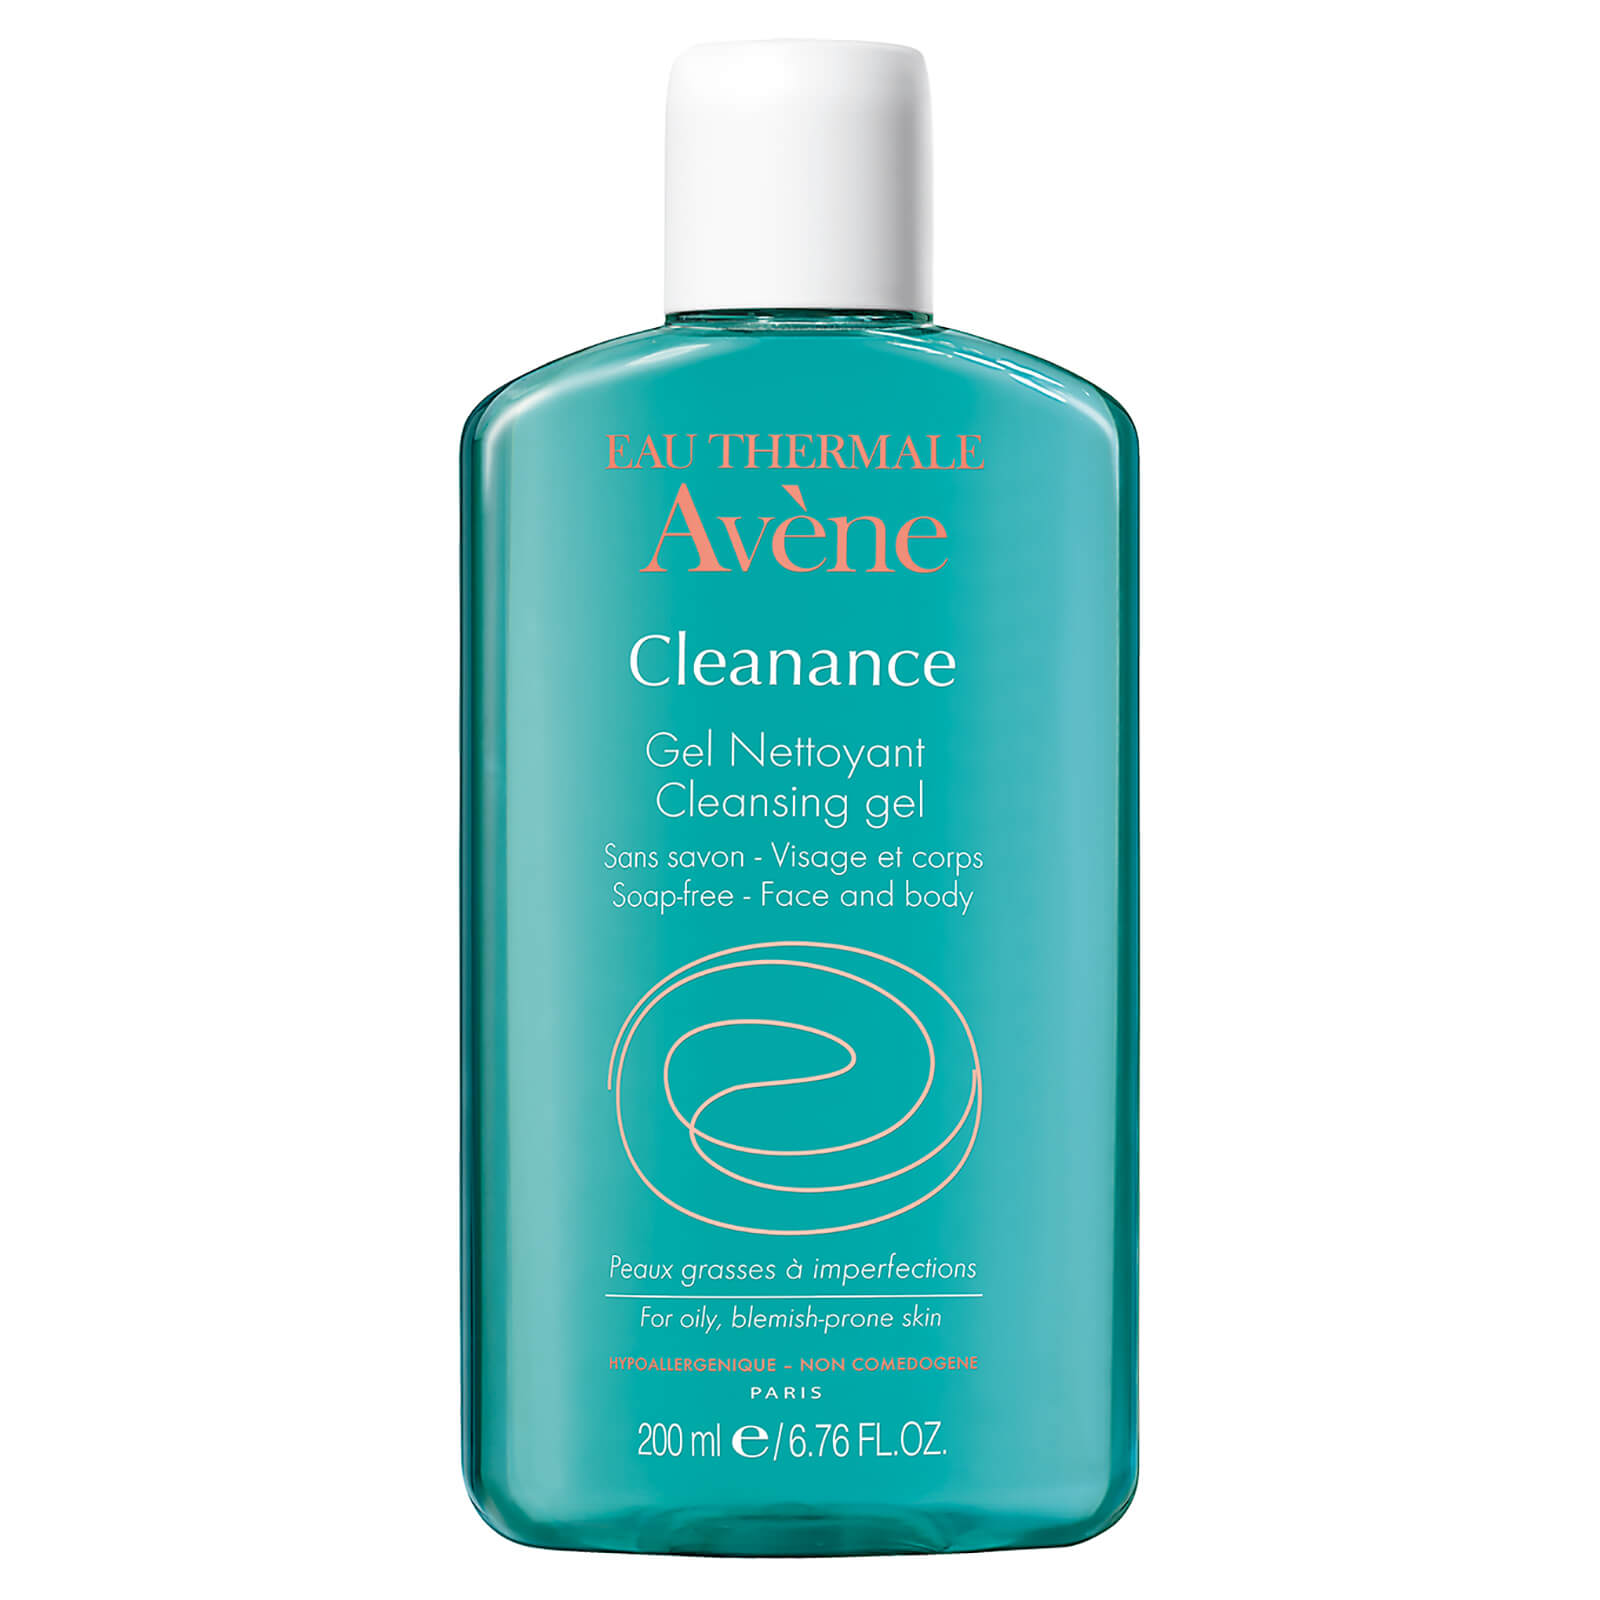 Avene Cleanance Gel 200ml product available at family pharmacy online buy now at qatar doha